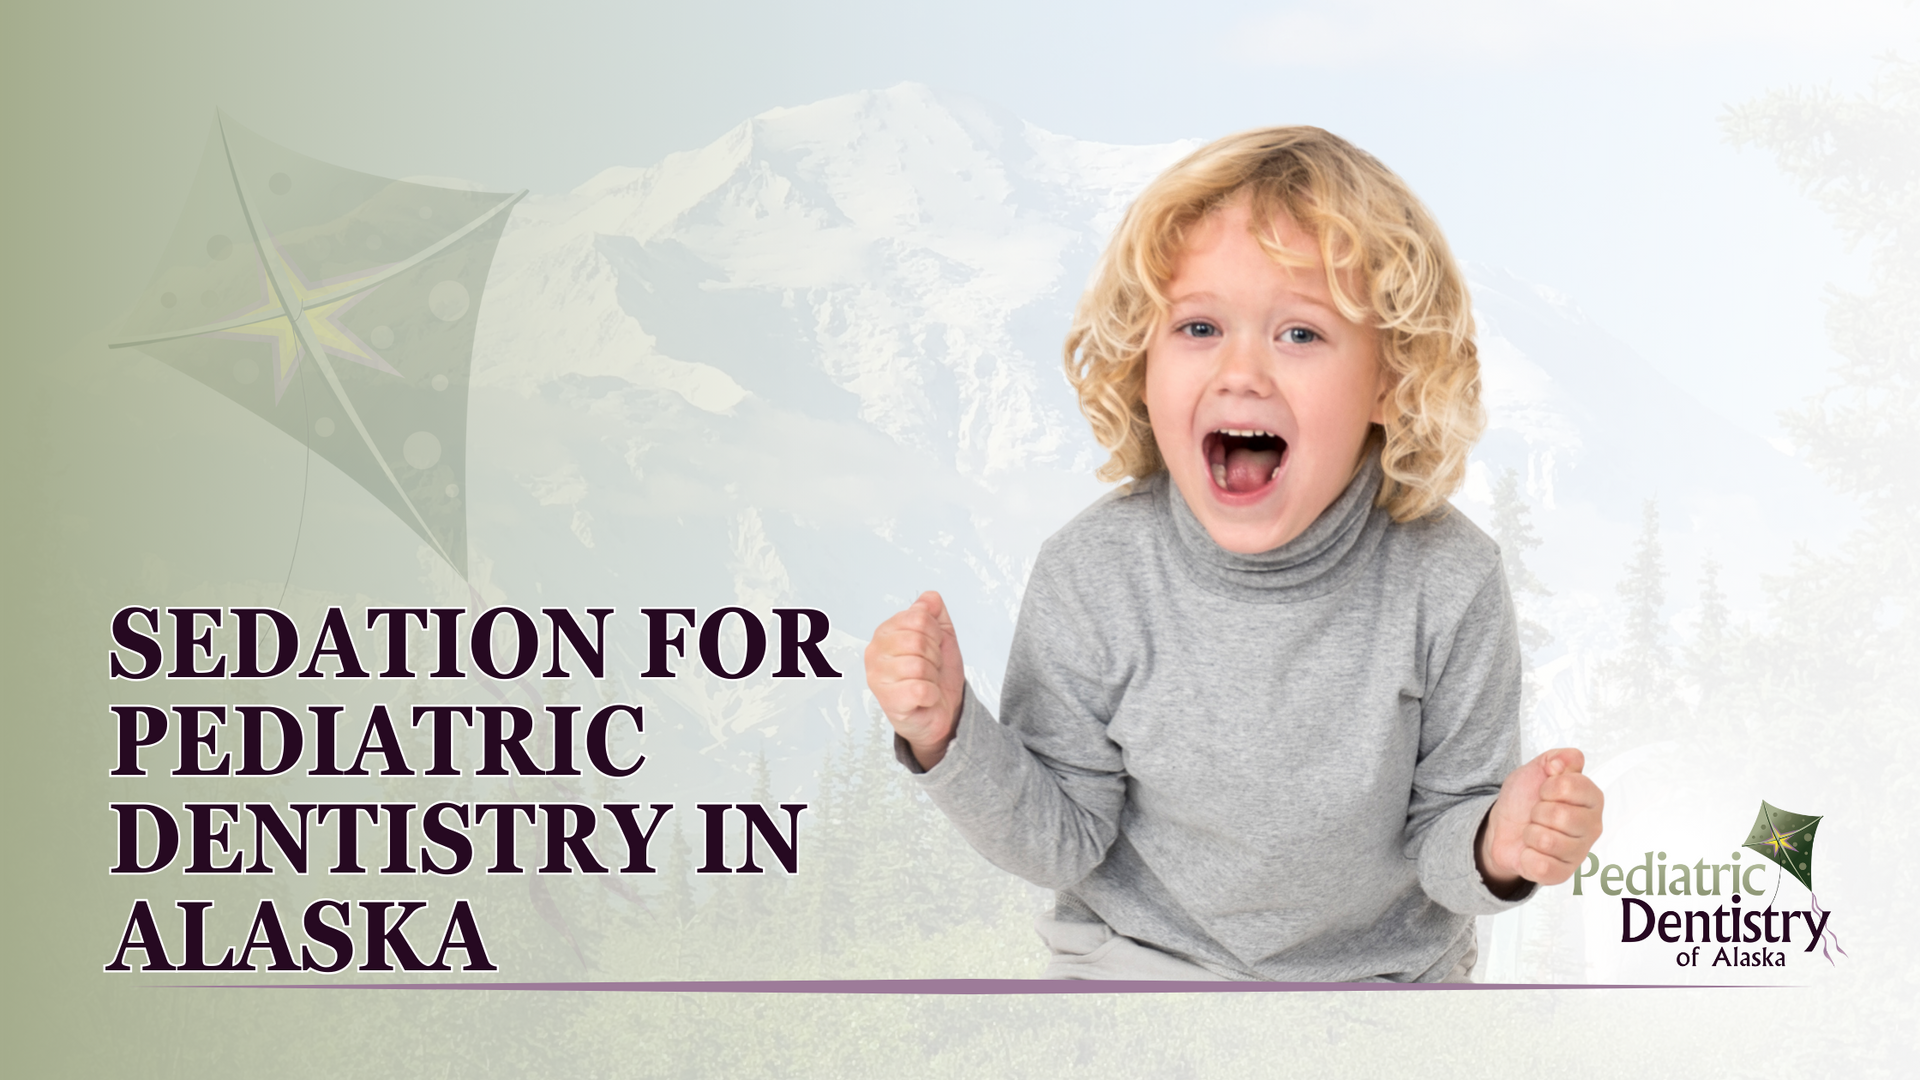 A little boy is giving a thumbs up with the words sedation for pediatric dentistry in alaska